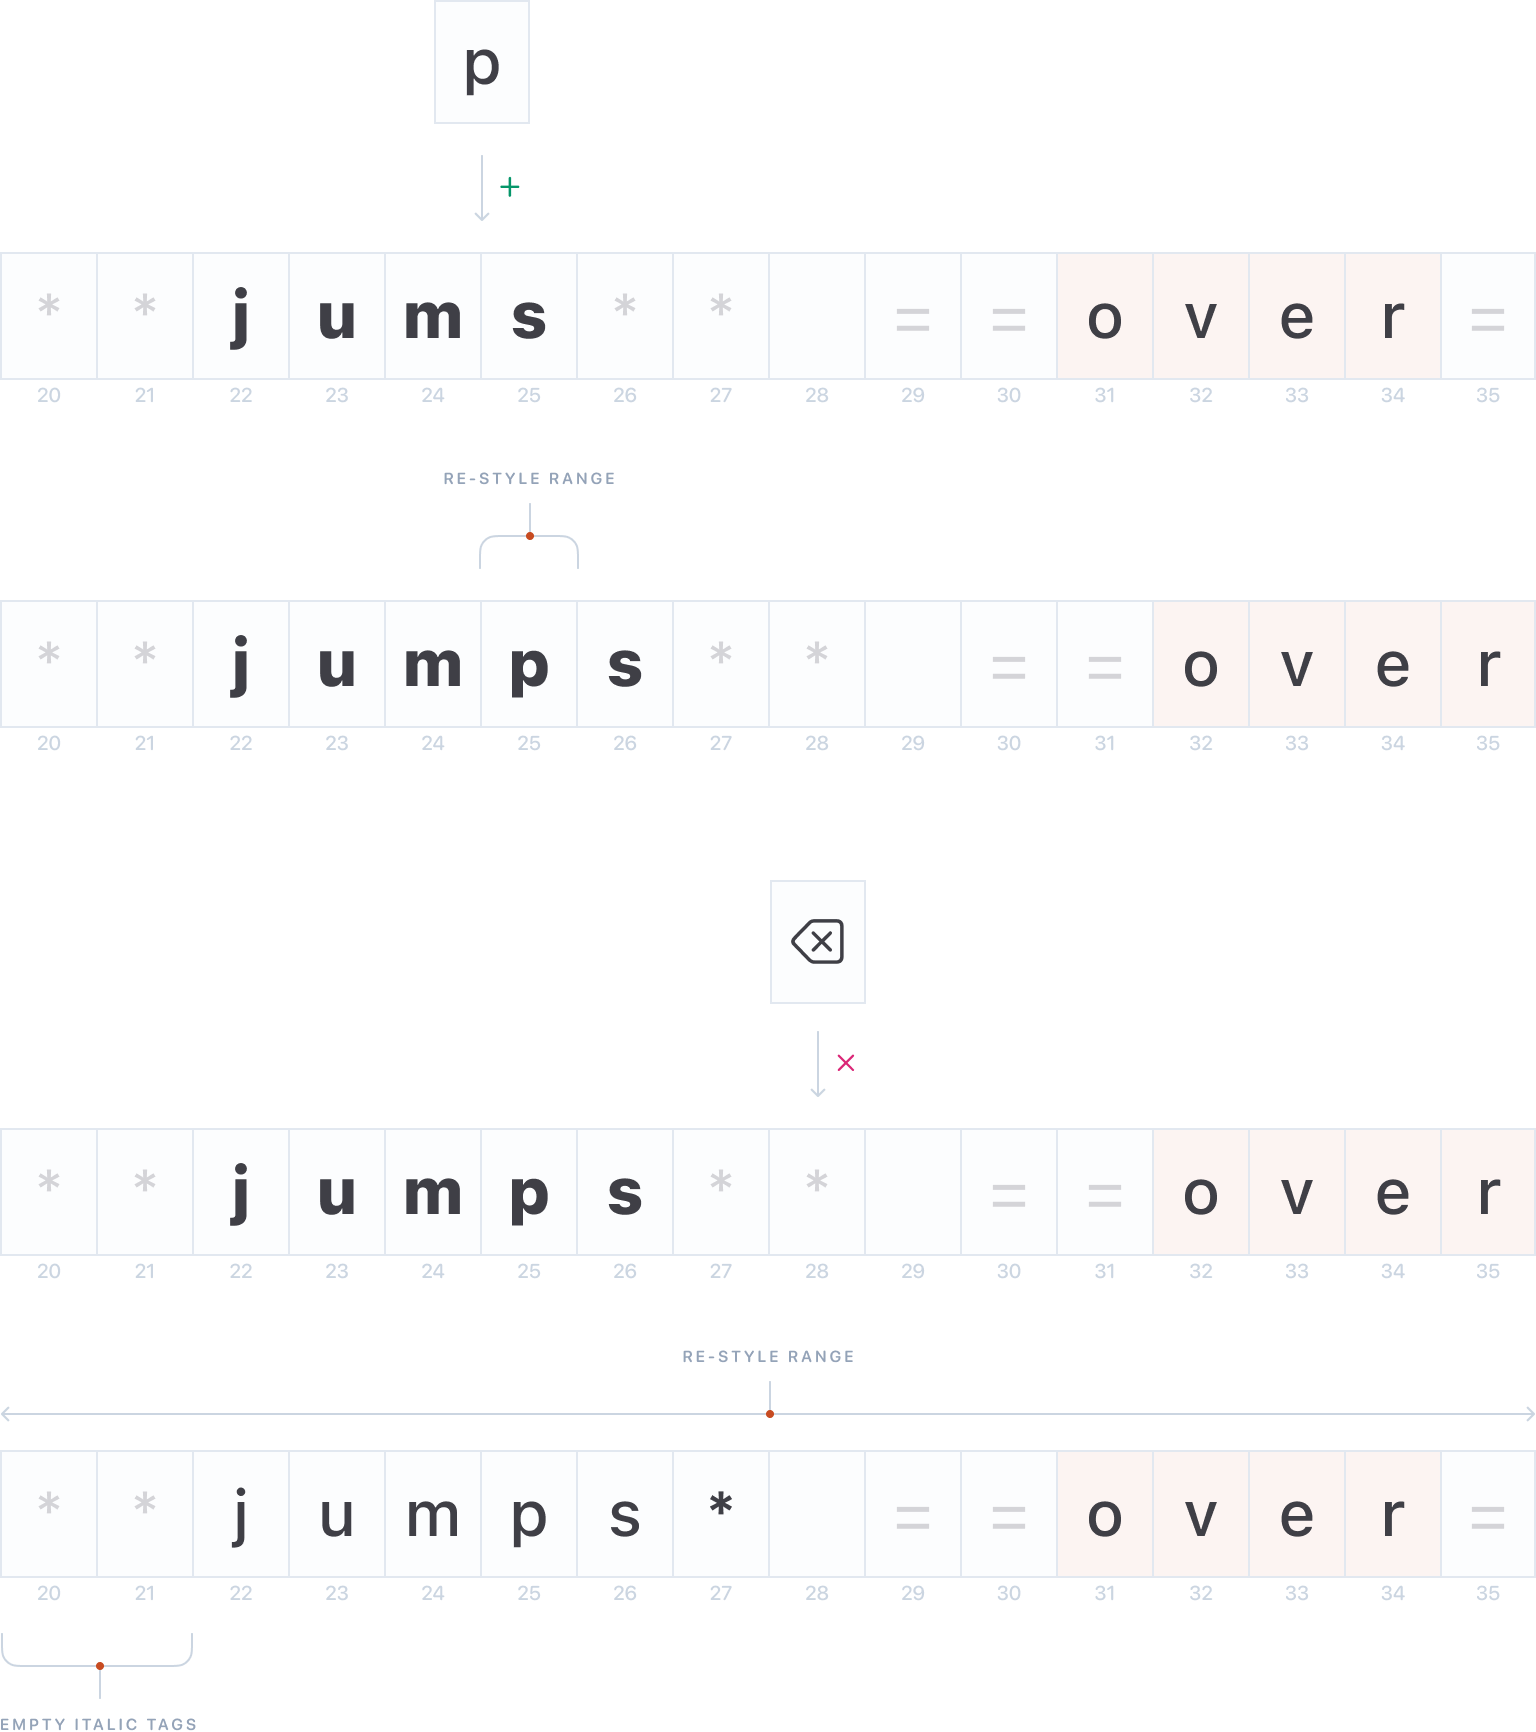 Two diagrams. In the first diagram the letter “p” is inserted to text “**jums** ==over=” between “m” and “s”. The newly inserted letter “p” is restyled as a result. In the second diagram the letter “*” is deleted from “**jumps** ==over”. The whole paragraph is restyled as a result and “jumps” is no longer bold.